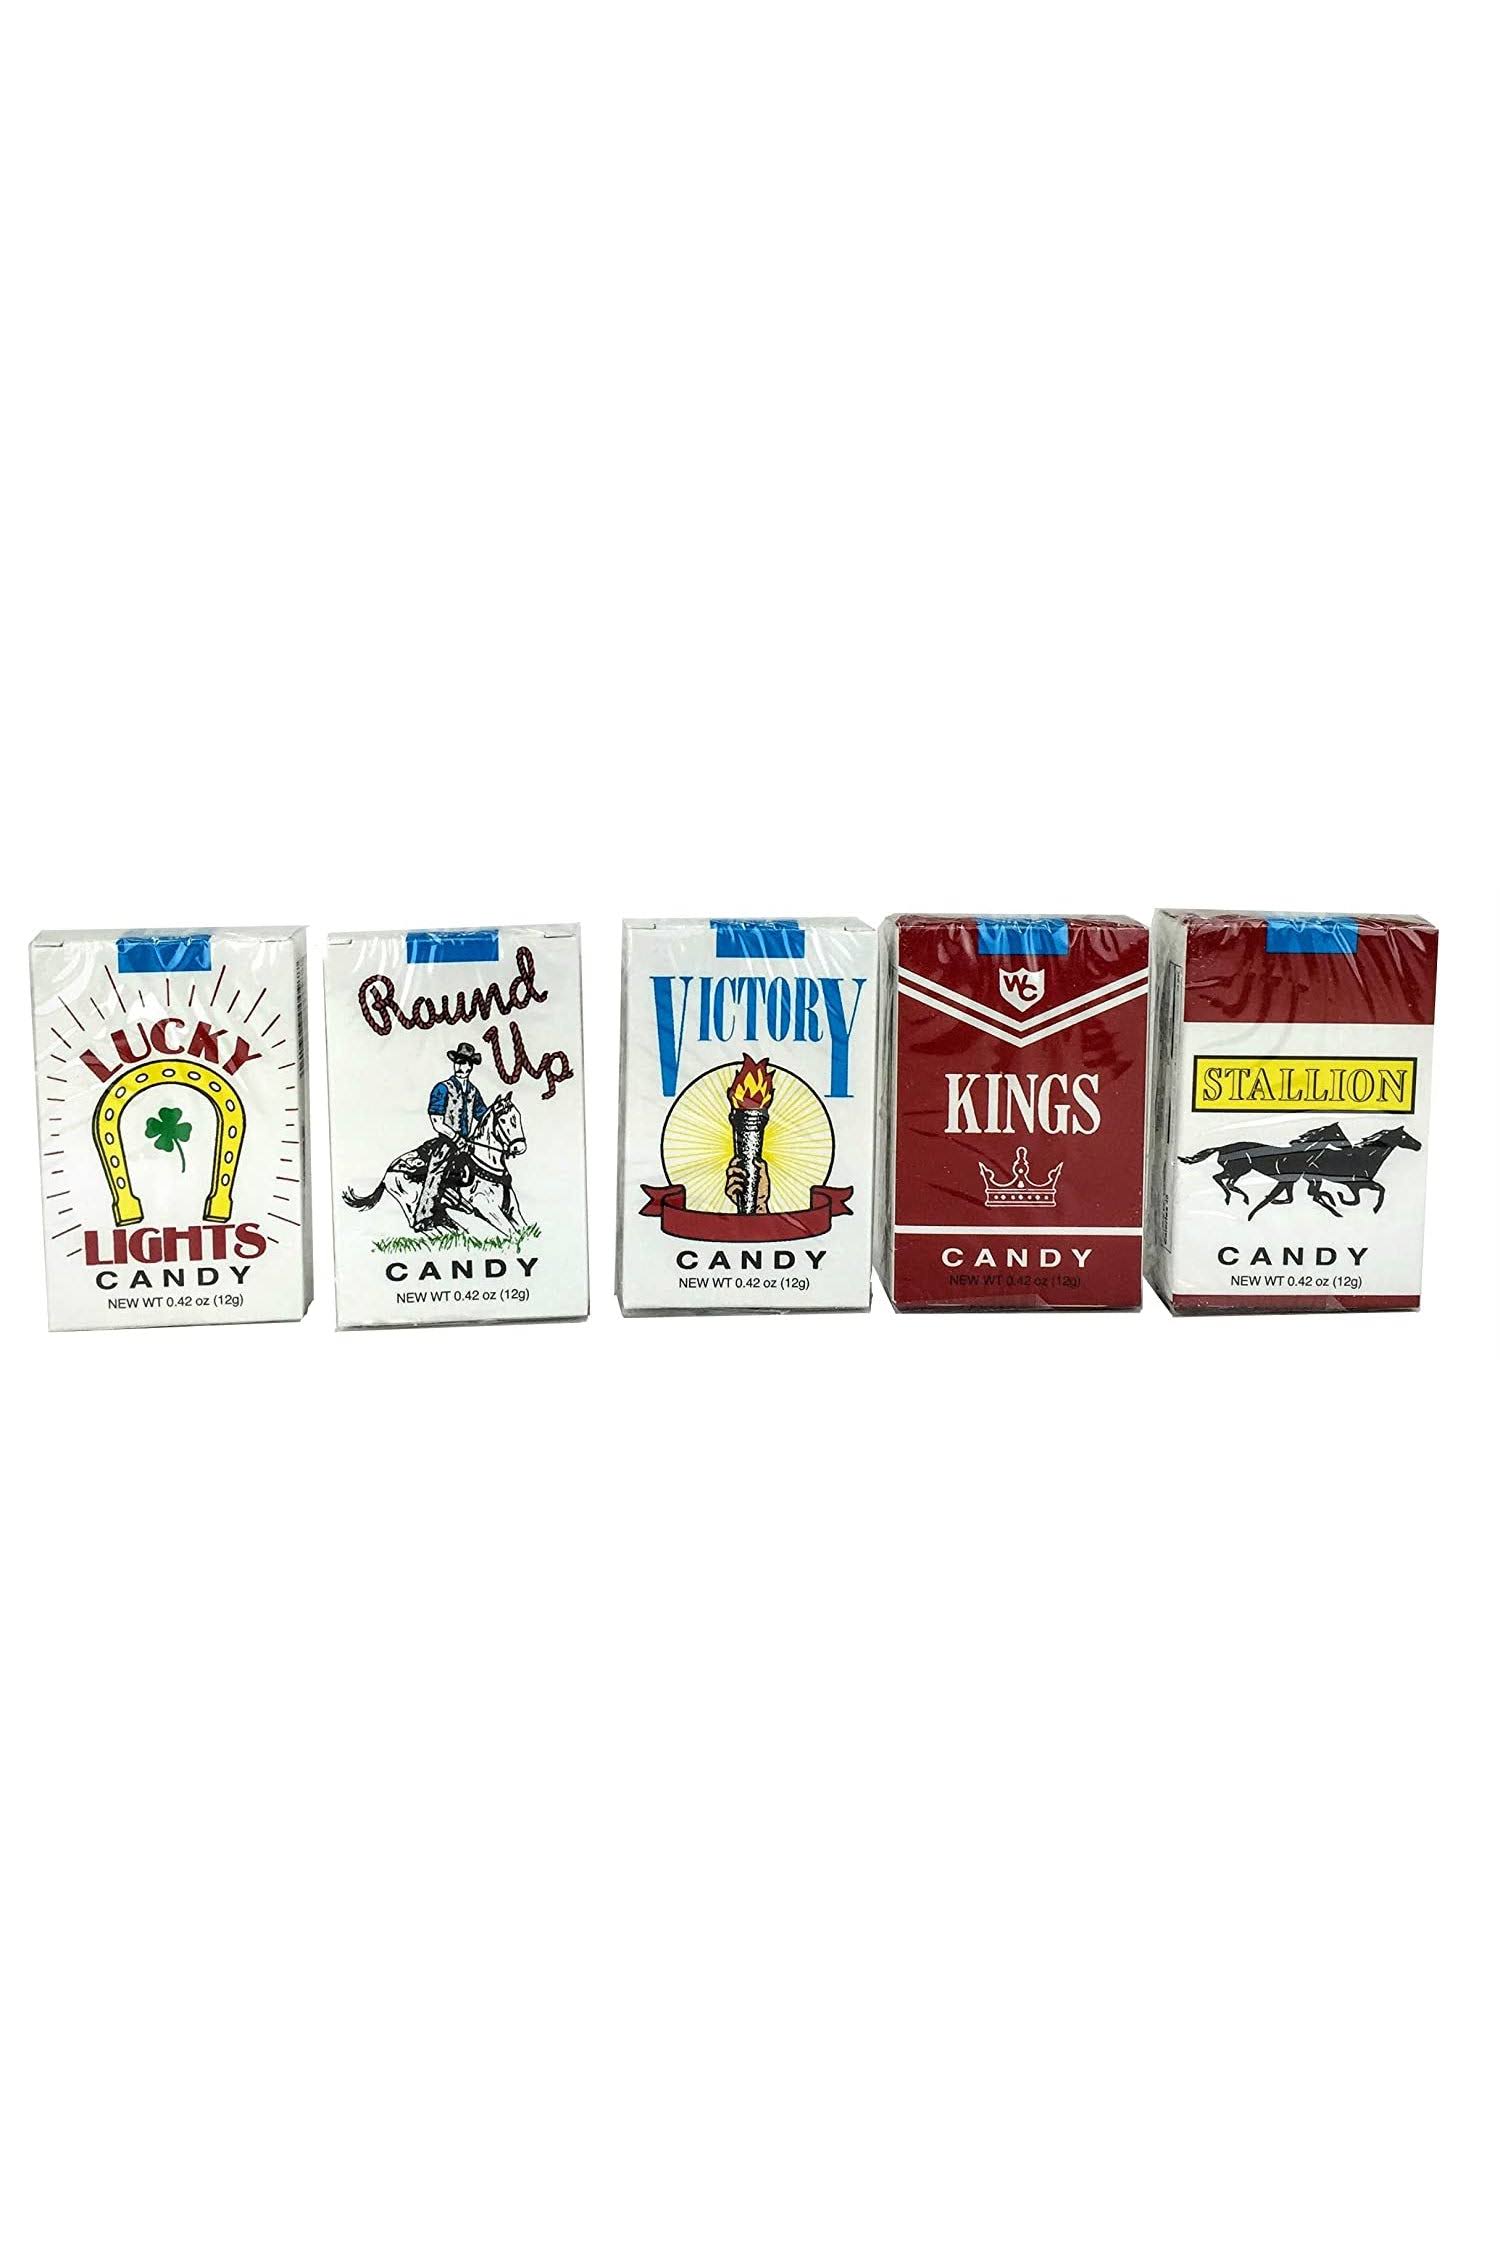 Candy Cigarettes - 1 Pack - World Confections